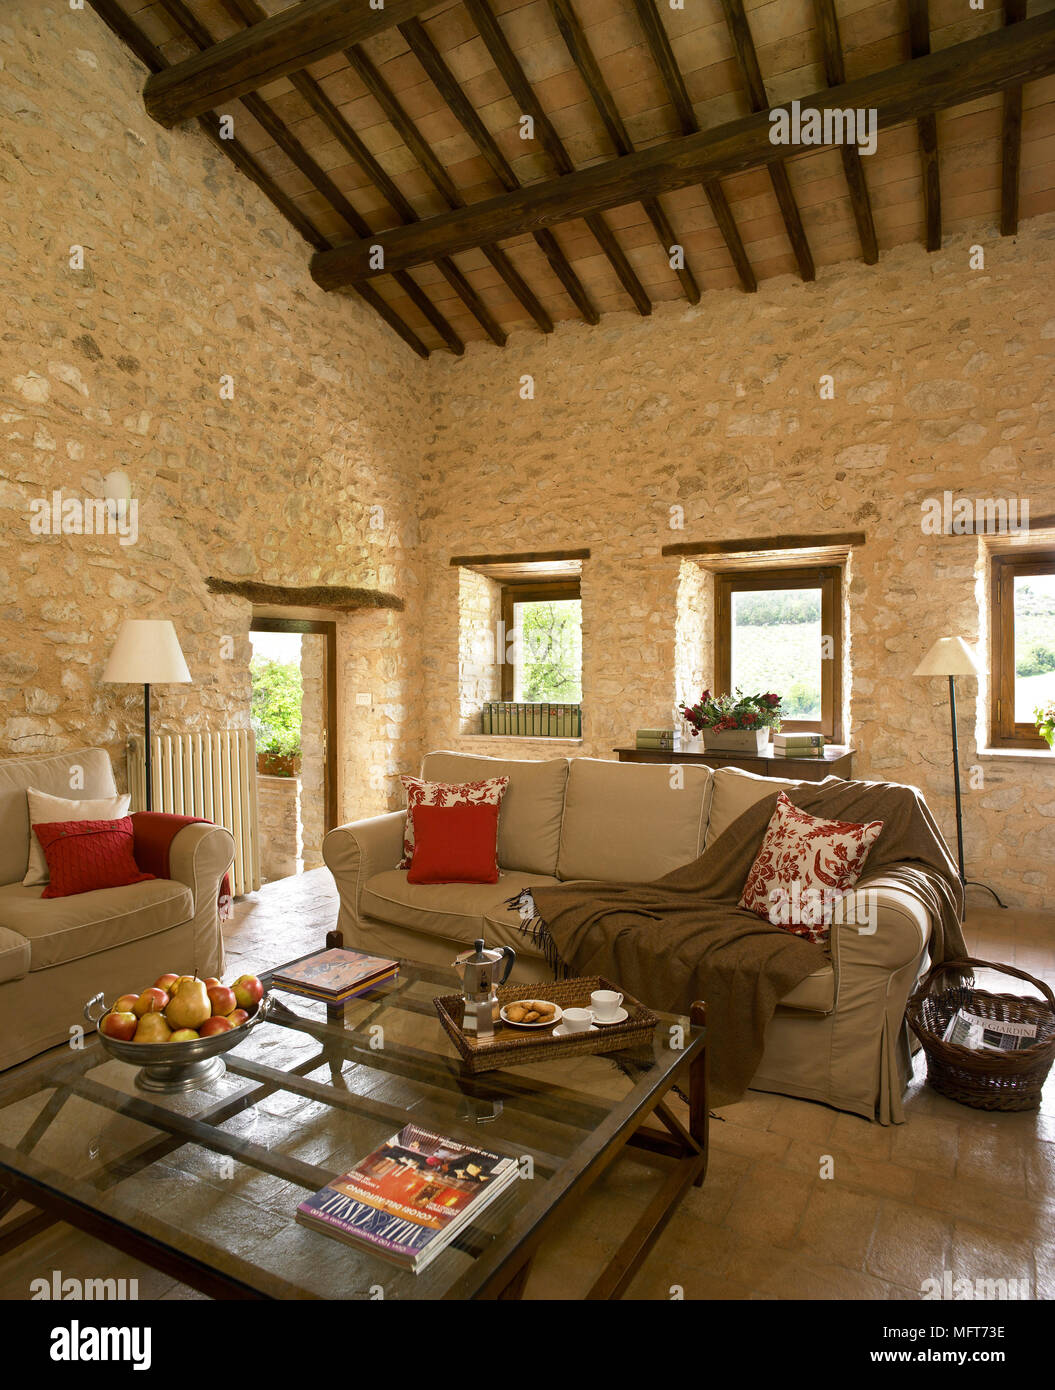 A Country Sitting Room With Exposed Rustic Stone Walls And